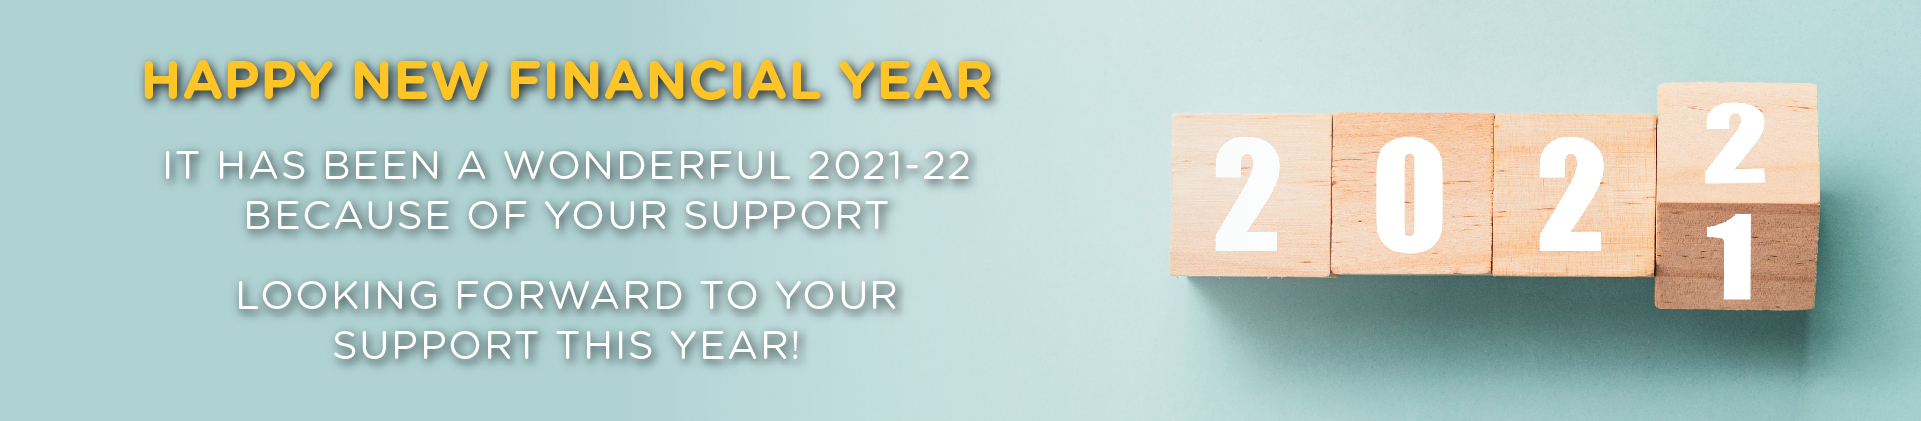 NDP_WEBSITE-BANNER_HAPPY-FINANCIAL-YEAR_REVISION-01_01-07-2022